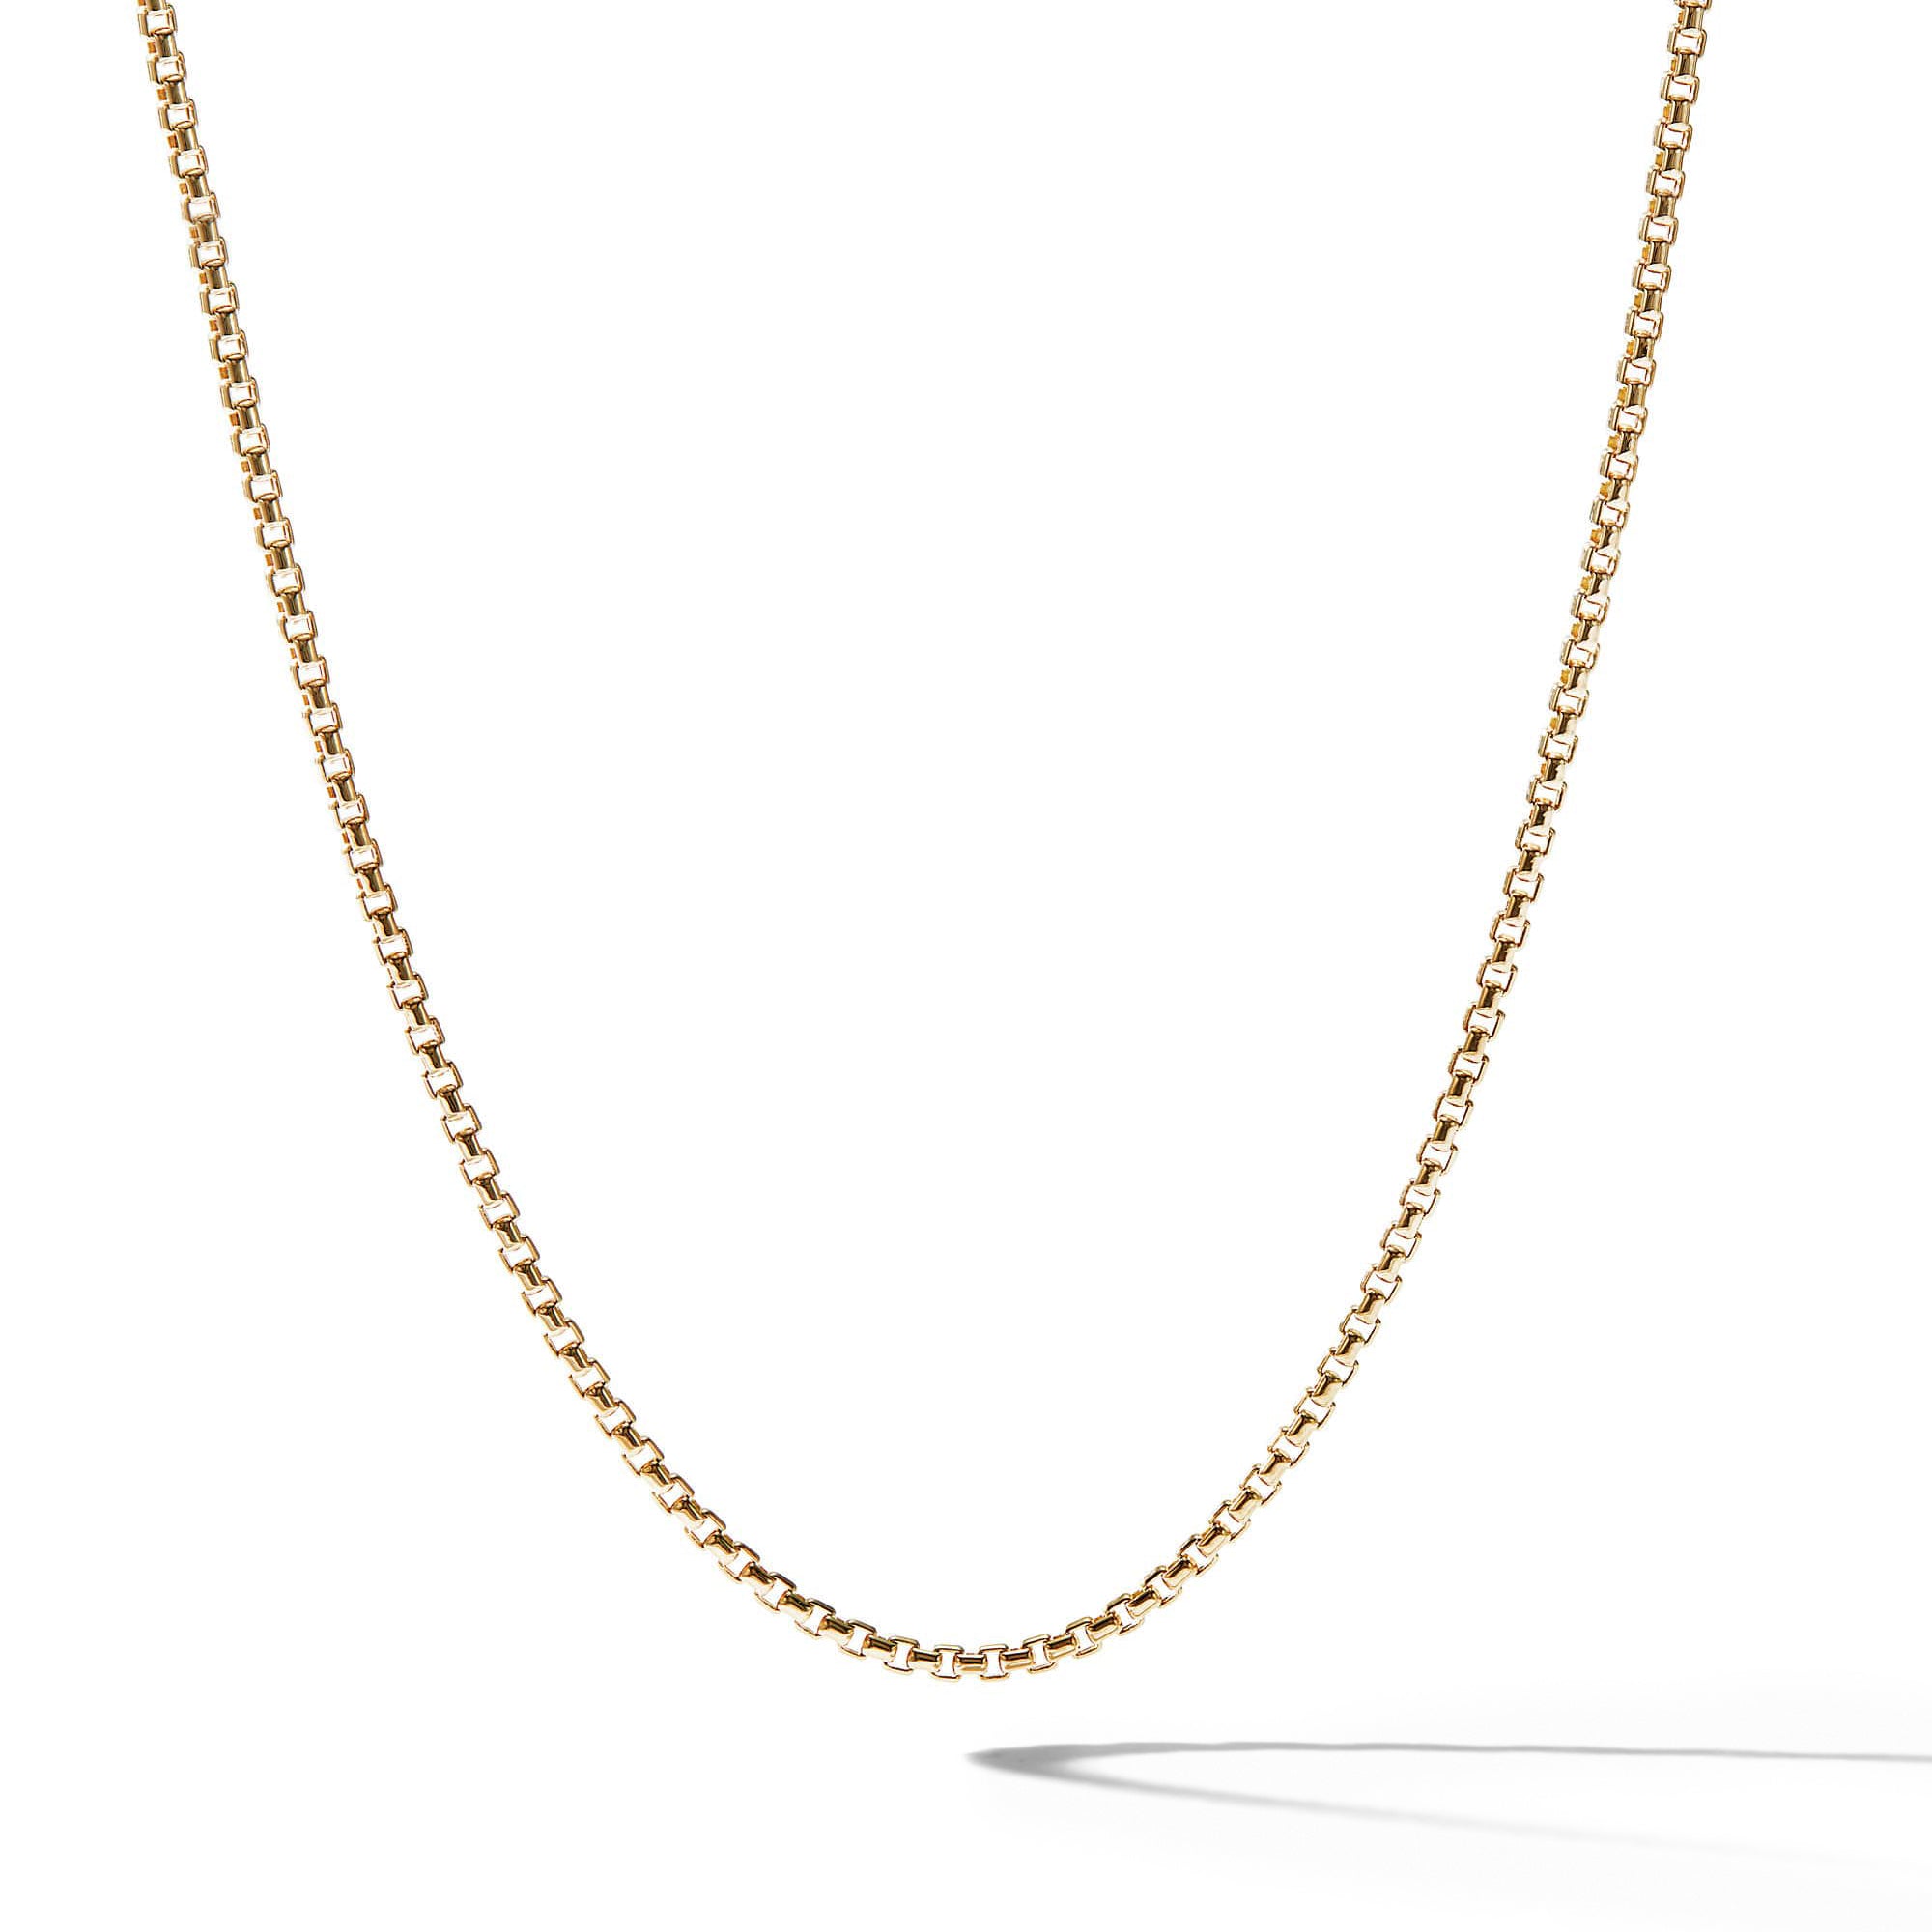 Box Chain Necklace in 18ct Yellow Gold, 1.7mm